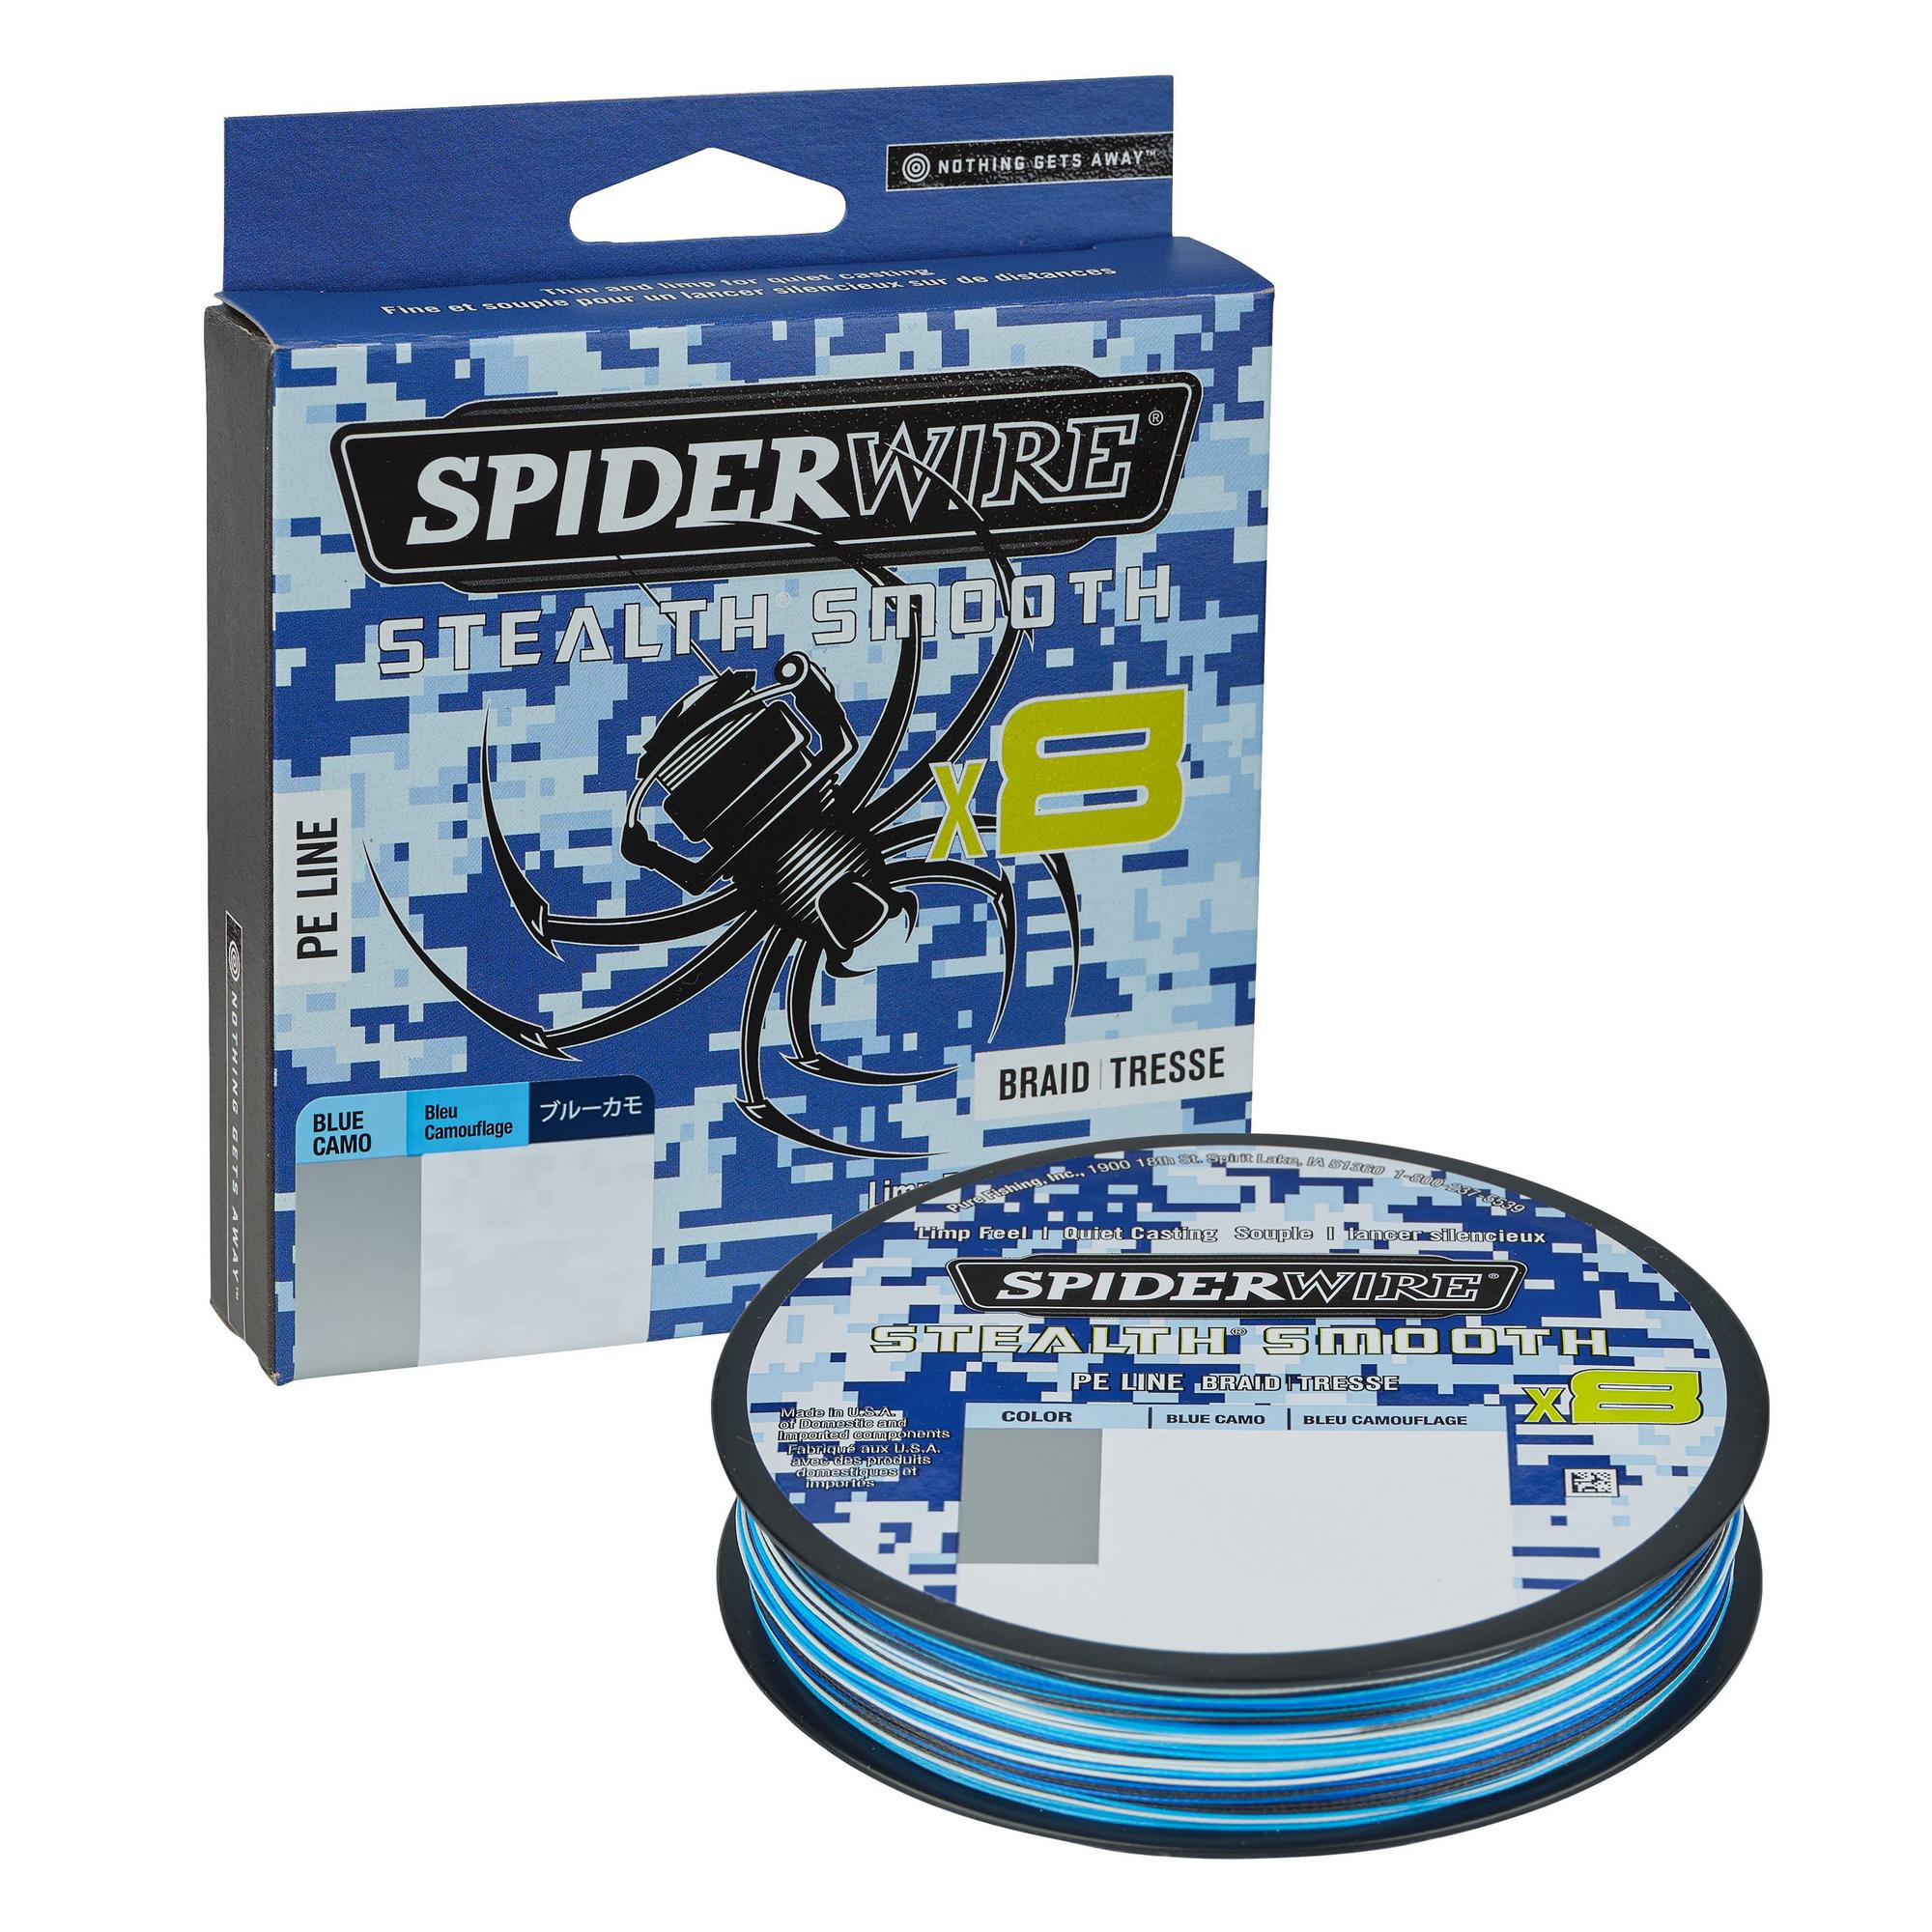 SpiderWire Stealth Smooth 8 braid review - around £15 or less for